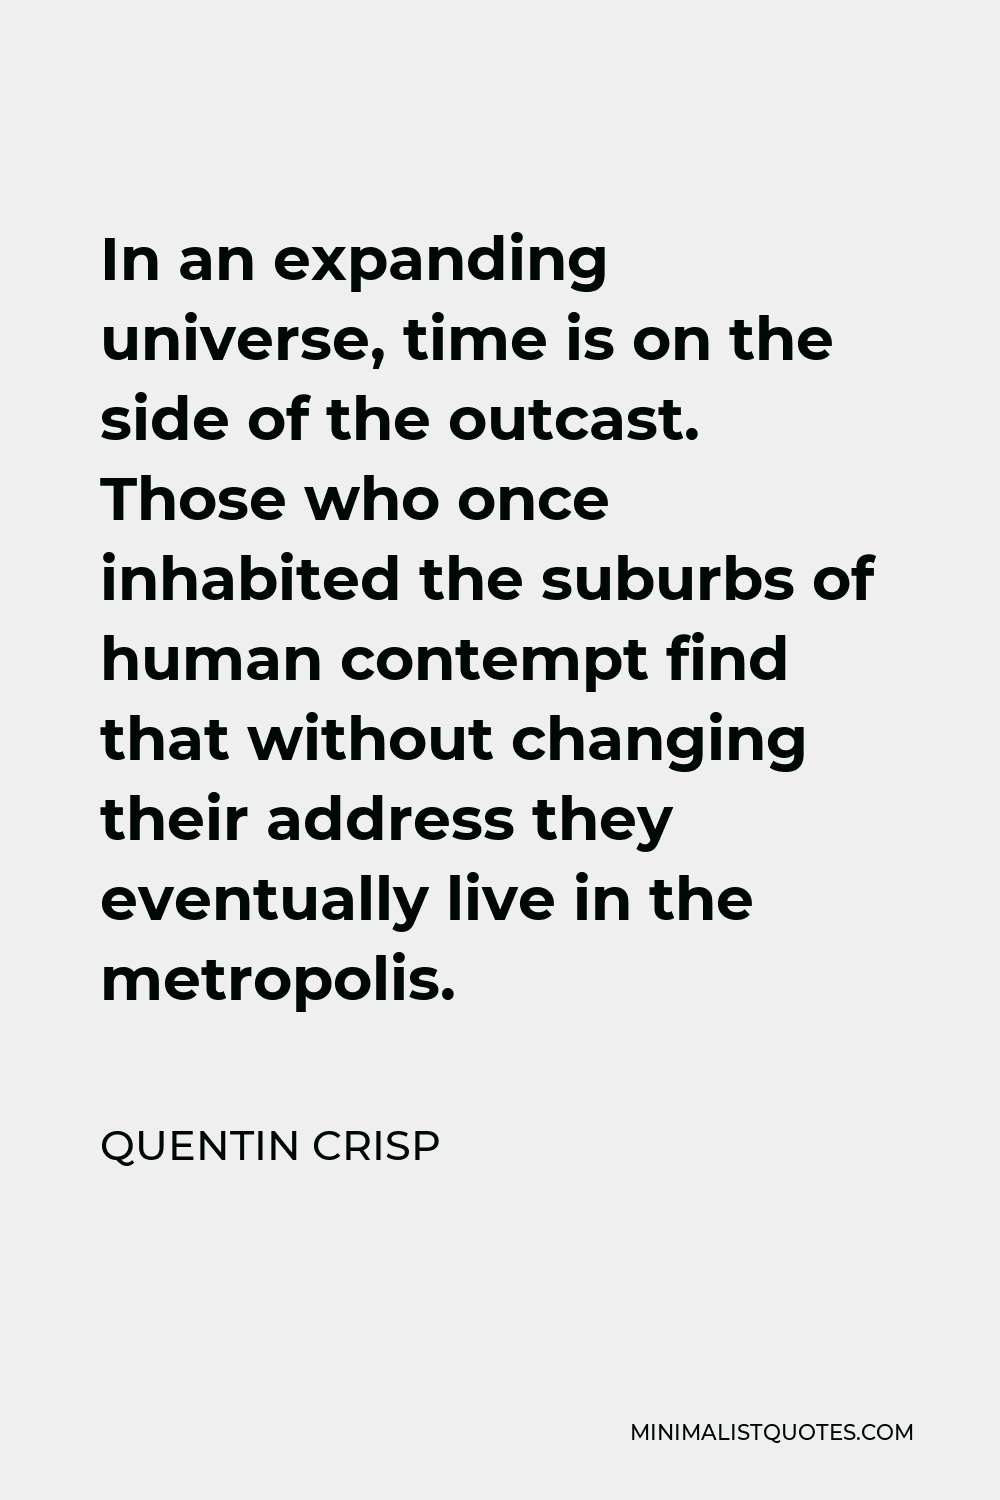 Quentin Crisp Quote - In an expanding universe, time is on the side of the outcast. Those who once inhabited the suburbs of human contempt find that without changing their address they eventually live in the metropolis.